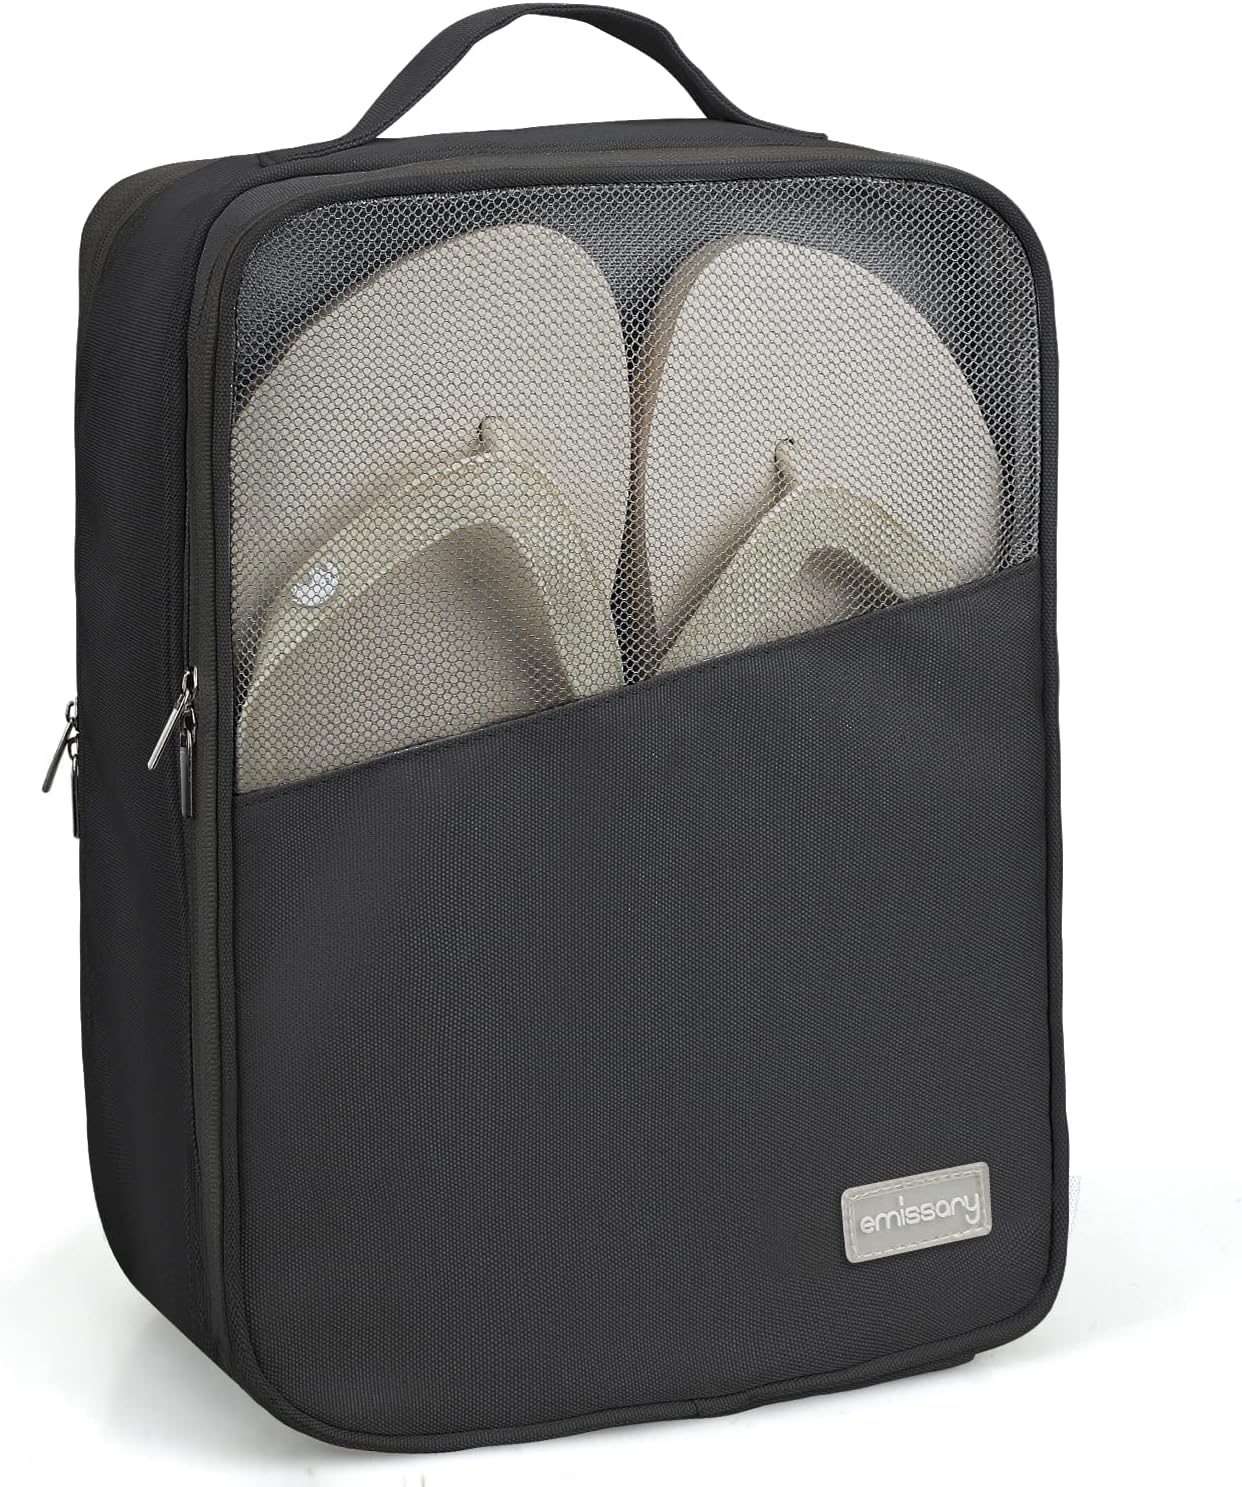 Emissary Shoe Bag Holds 3 Pair of Shoes for Travel, [...]